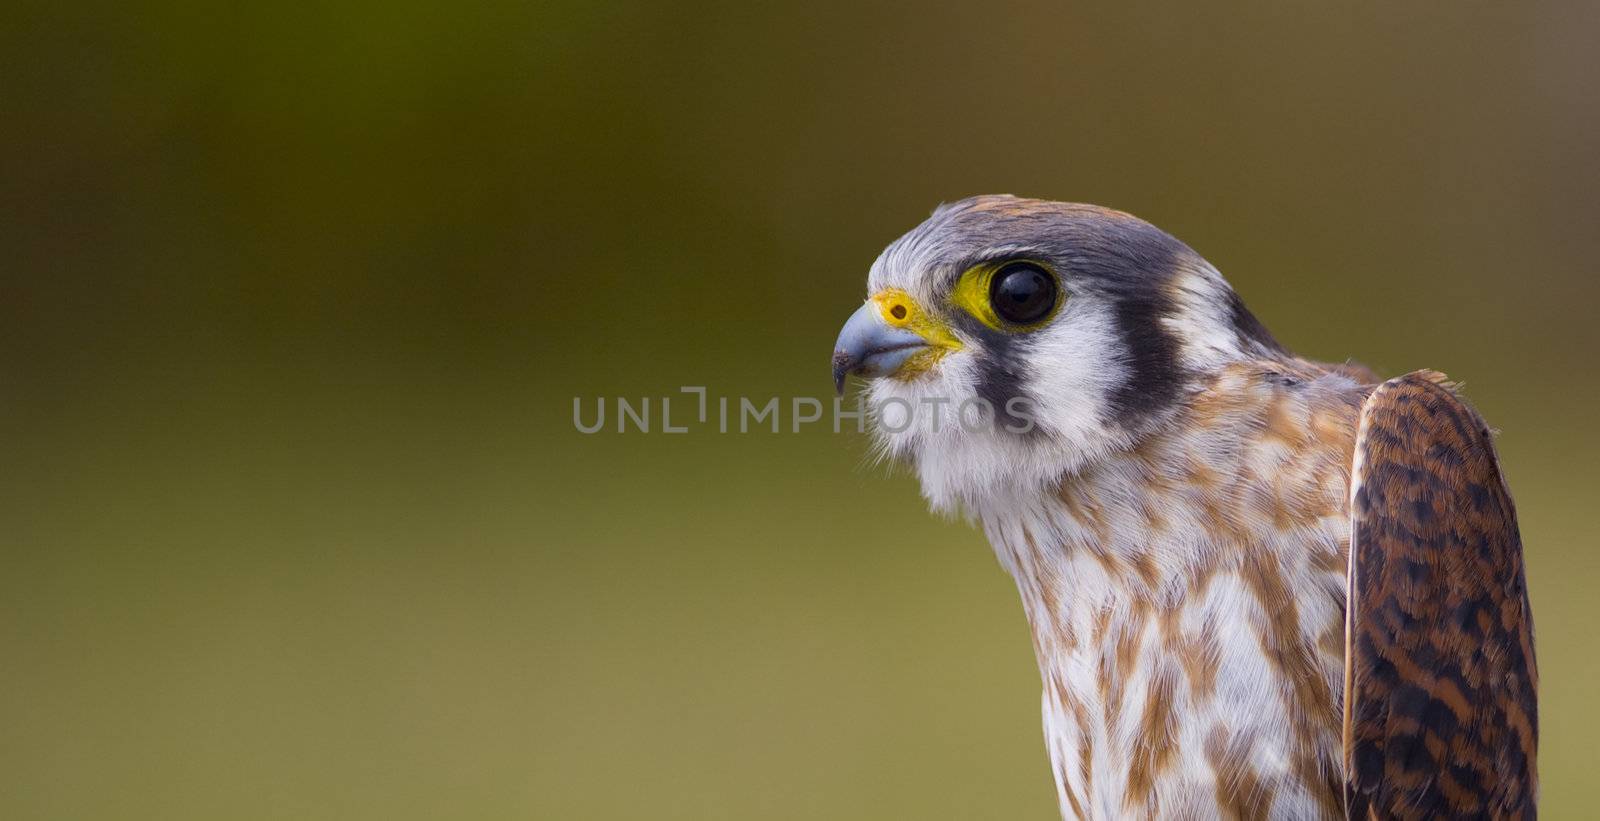 A portrait of a female American Kestrel (falco sparverius) (also known as the sparrow hawk) about to be released after being banded.